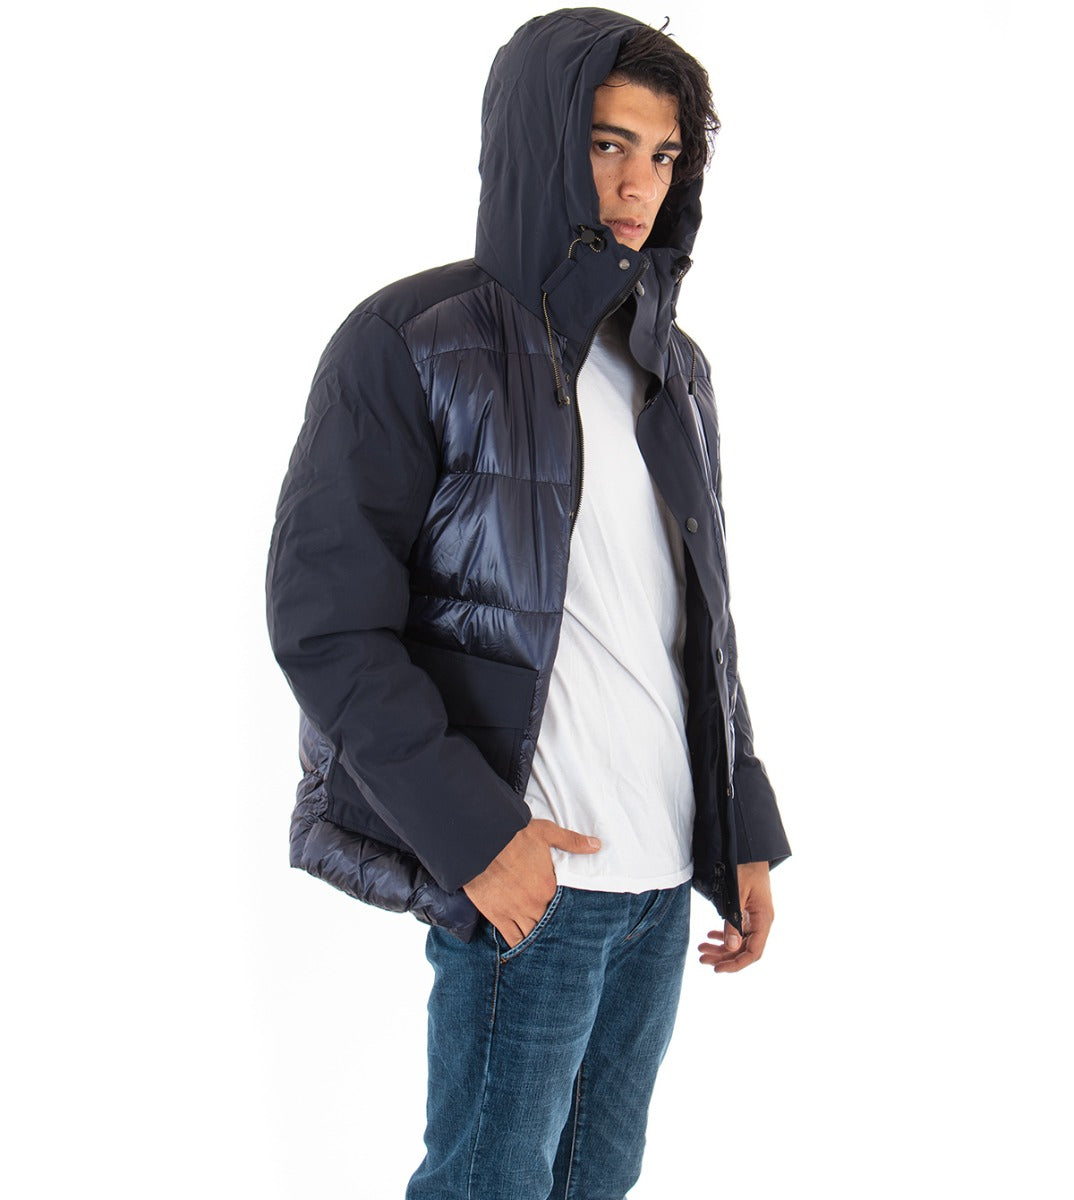 Men's Bomber Jacket Solid Color Blue Hood Long Sleeves Casual GIOSAL